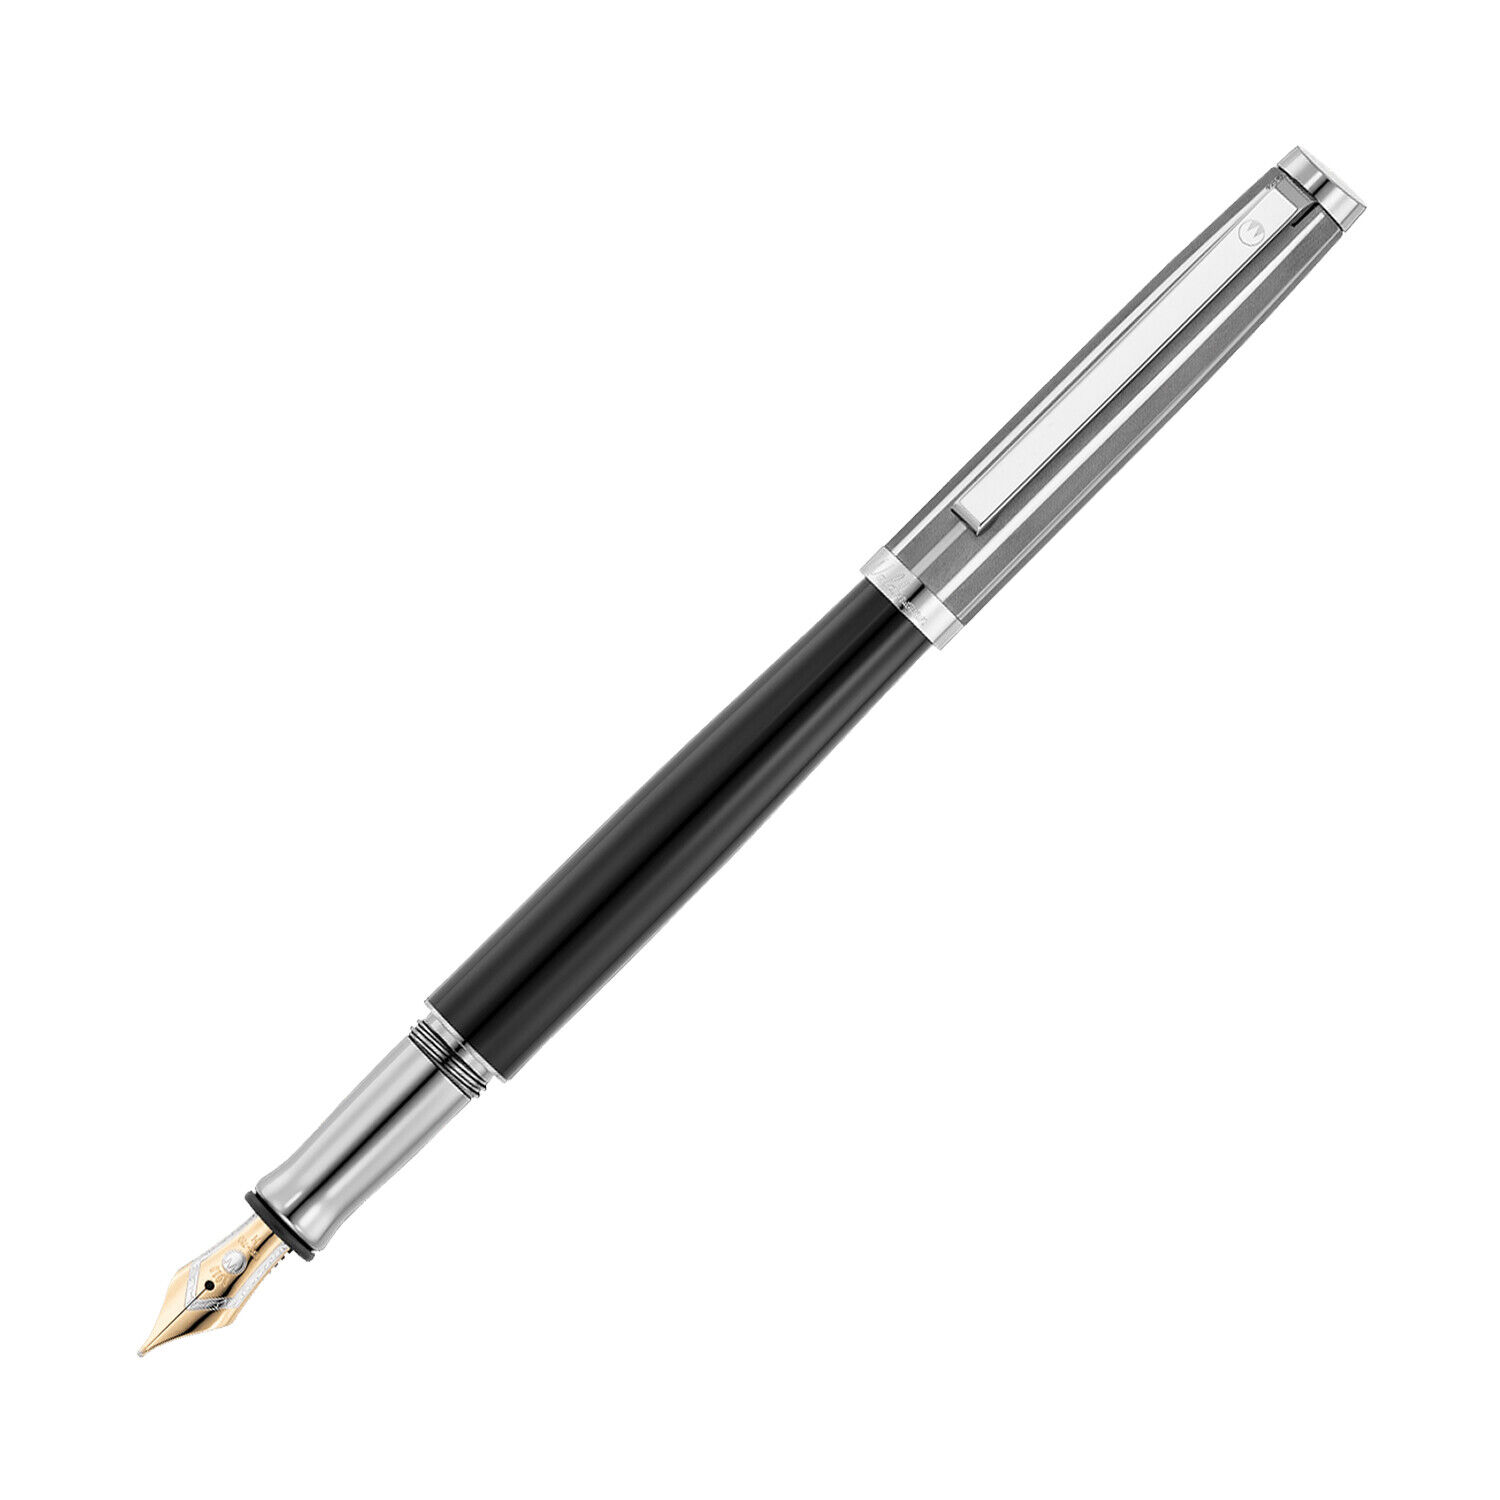 Waldmann Tuscany Fountain Pen in Frosted Ruthenium, 18kt Gold Nib - Broad - NEW